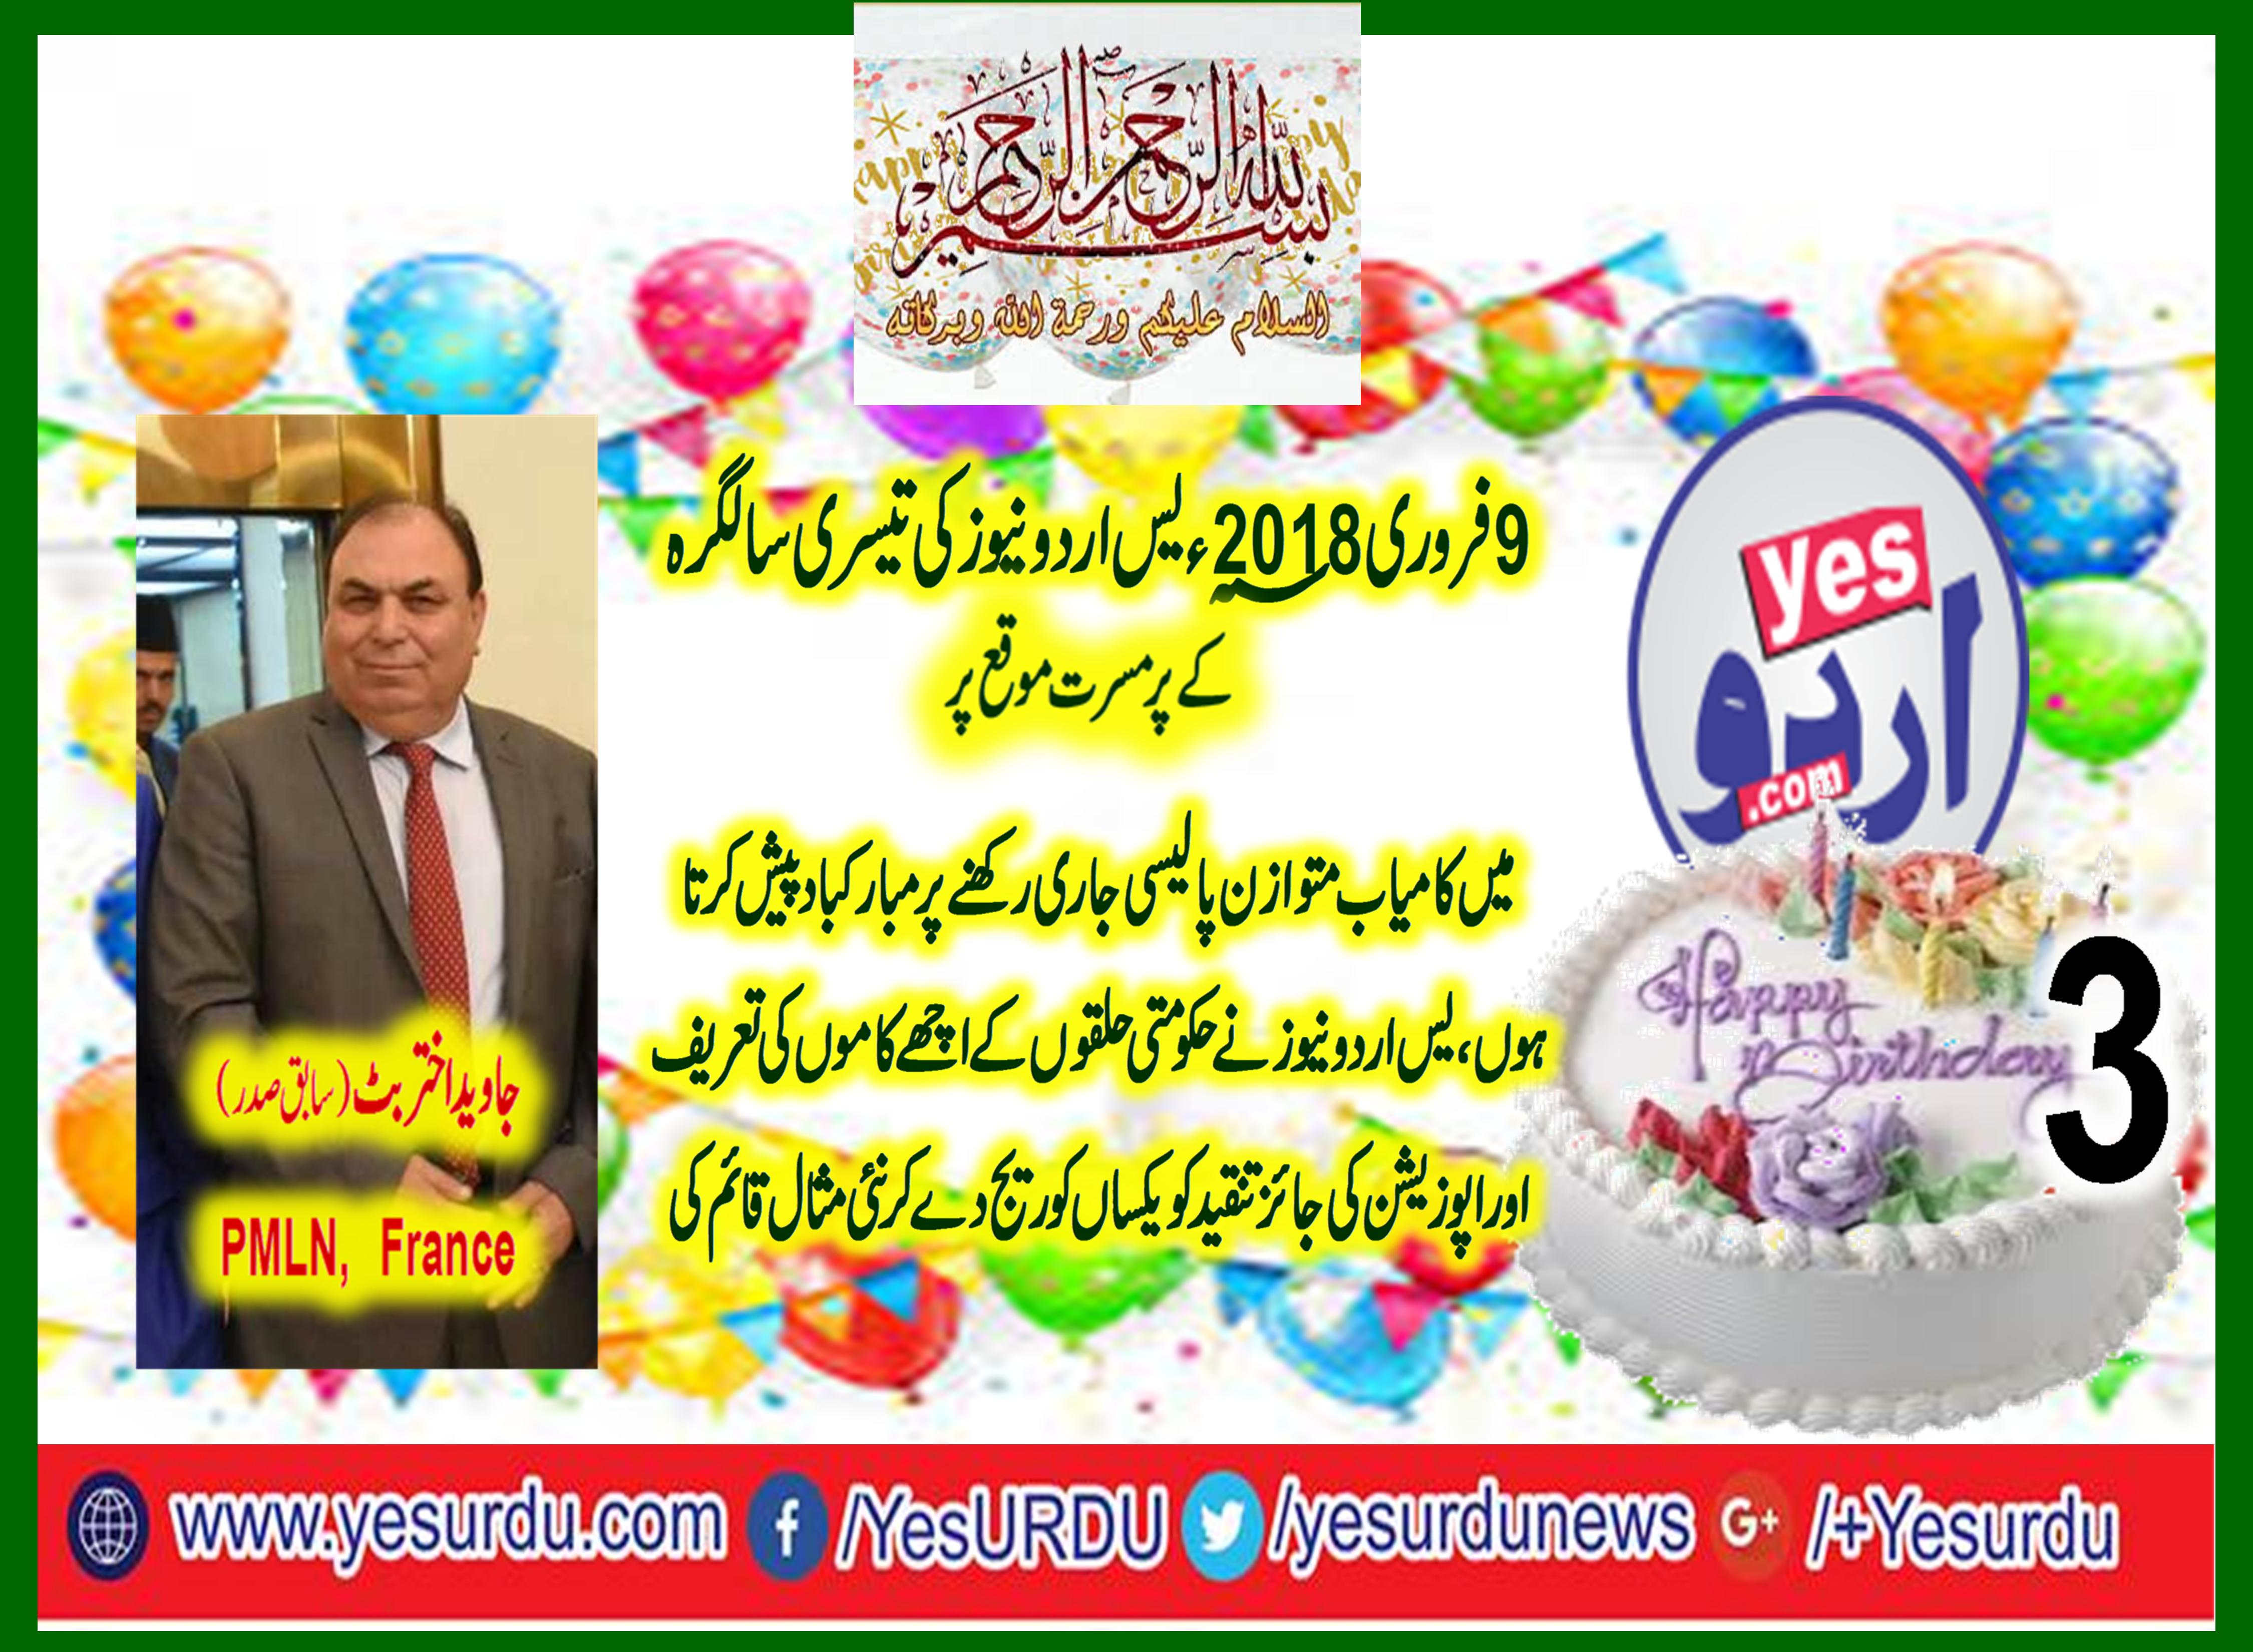 THIRD, BIRTHDAY, OF, YES URDU, NEWS, QARI FAROOQ AHMED, MANAGING, EDITOR, SENT, THE, MESSAGE, TO, READERS, AND, STAFF, OF, YES URDU, NEWS, ON, GREAT, DEDICATION, AND, HARD, WORK، BY, IBRAR KAYANI, SENIOR, LEADER, PTI, FRANCE, JAVED AKHTAR BUTT, PRESIDENT, PMLN, FRANCE